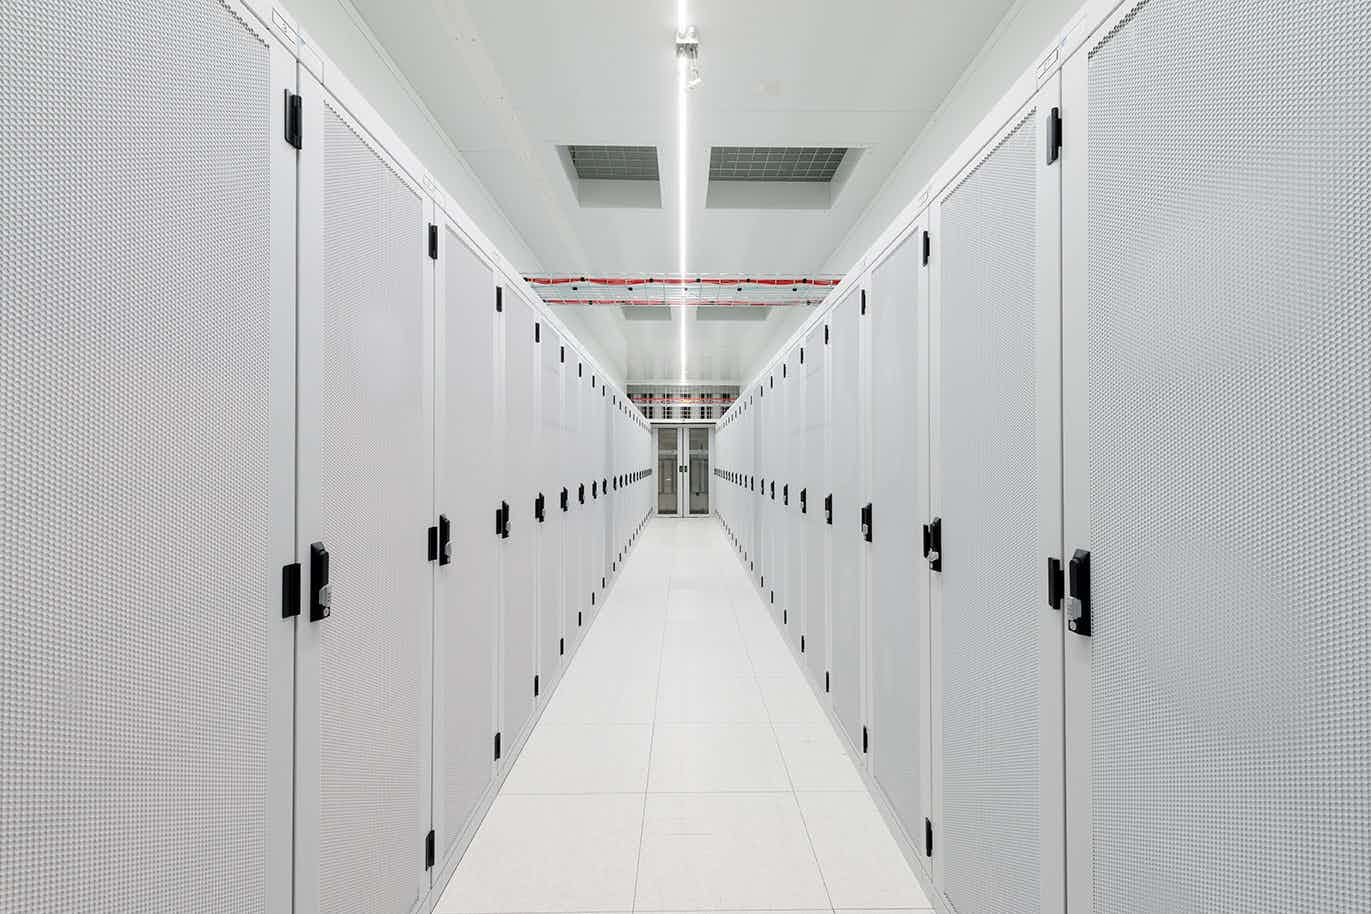 The Datacenter Group